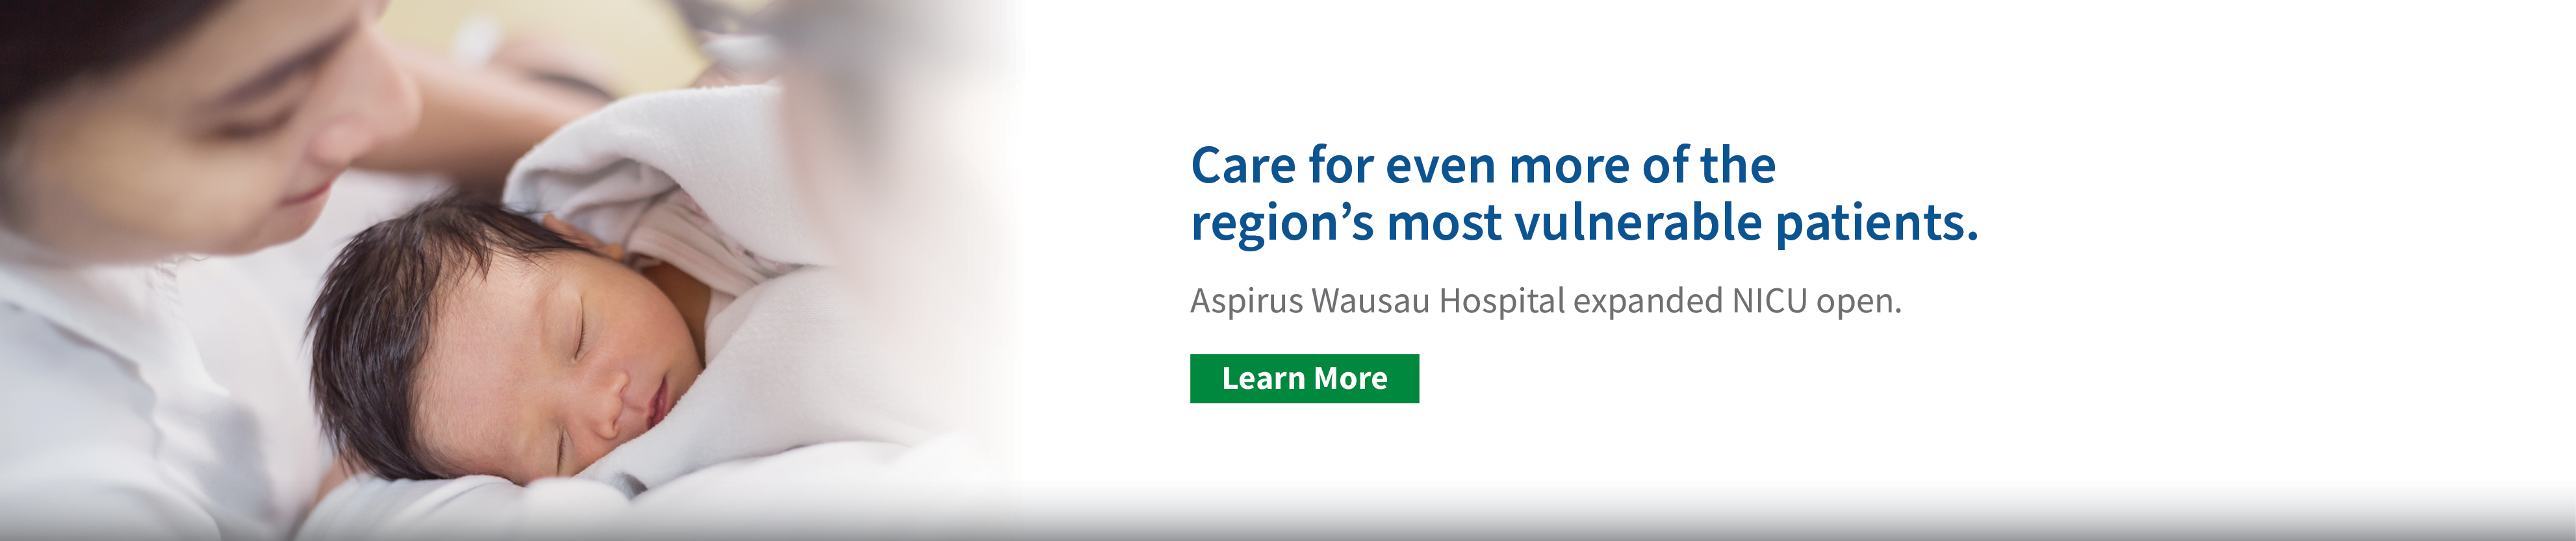 Care for even more of the region's most vulnerable patients. 